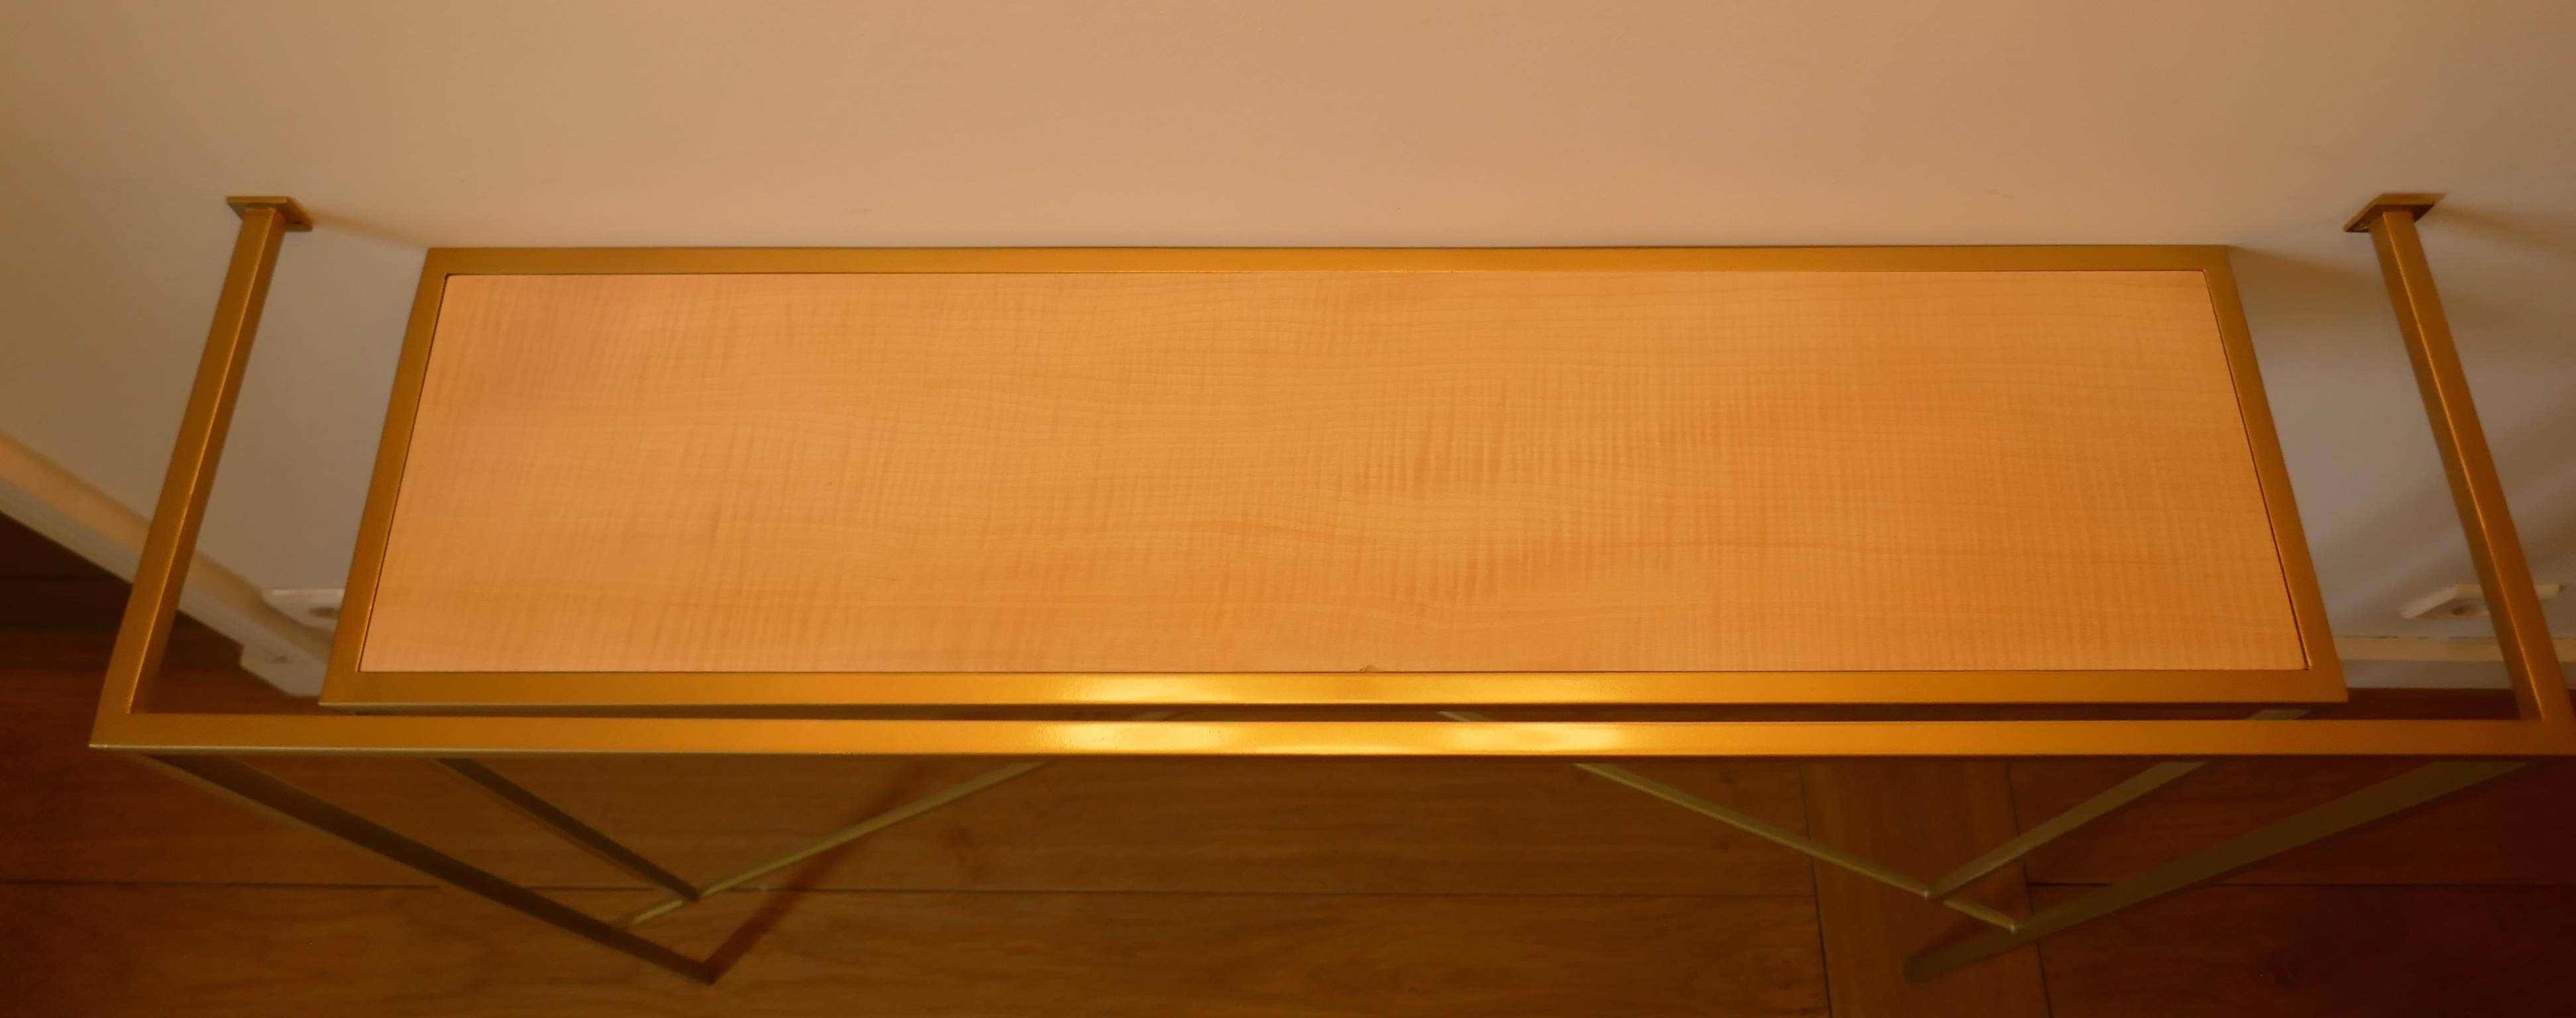 French Console in Gold, Bronze Brass Patina with One Sycamore Shelve by Aymeric Lefort For Sale